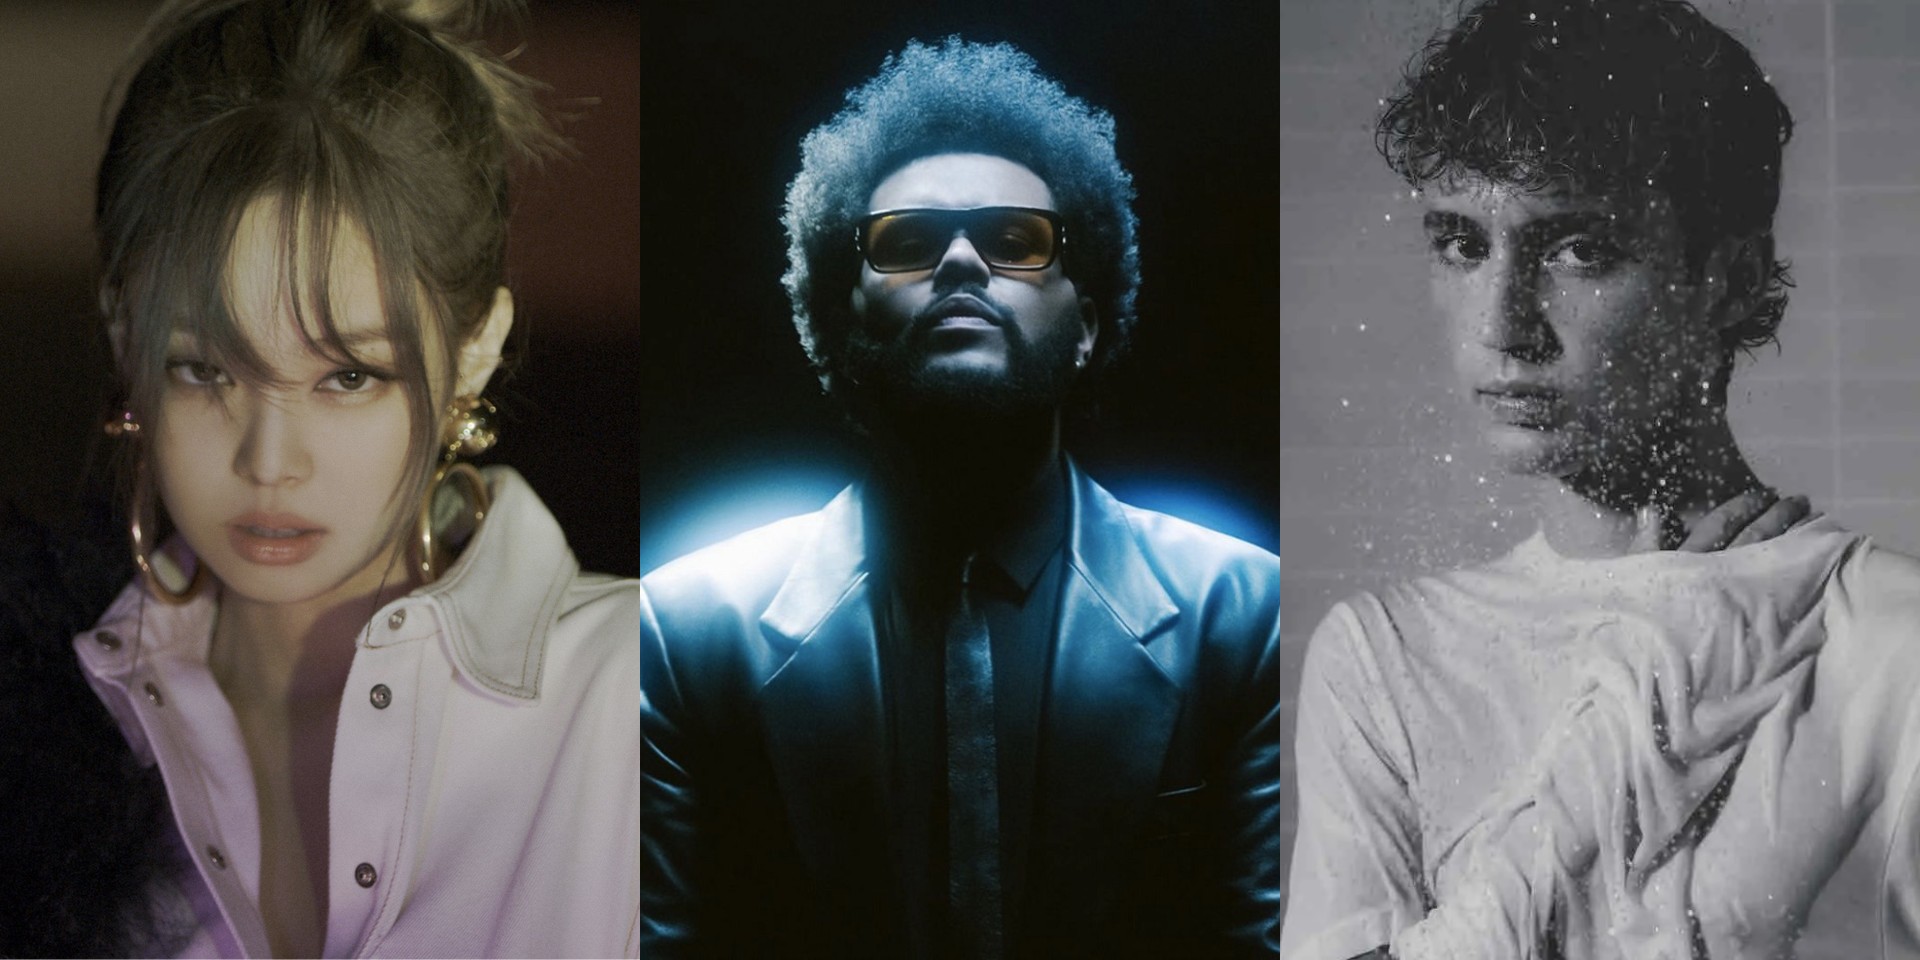 BLACKPINK's Jennie, Troye Sivan, and more to star in The Weeknd's upcoming drama series 'The Idol'